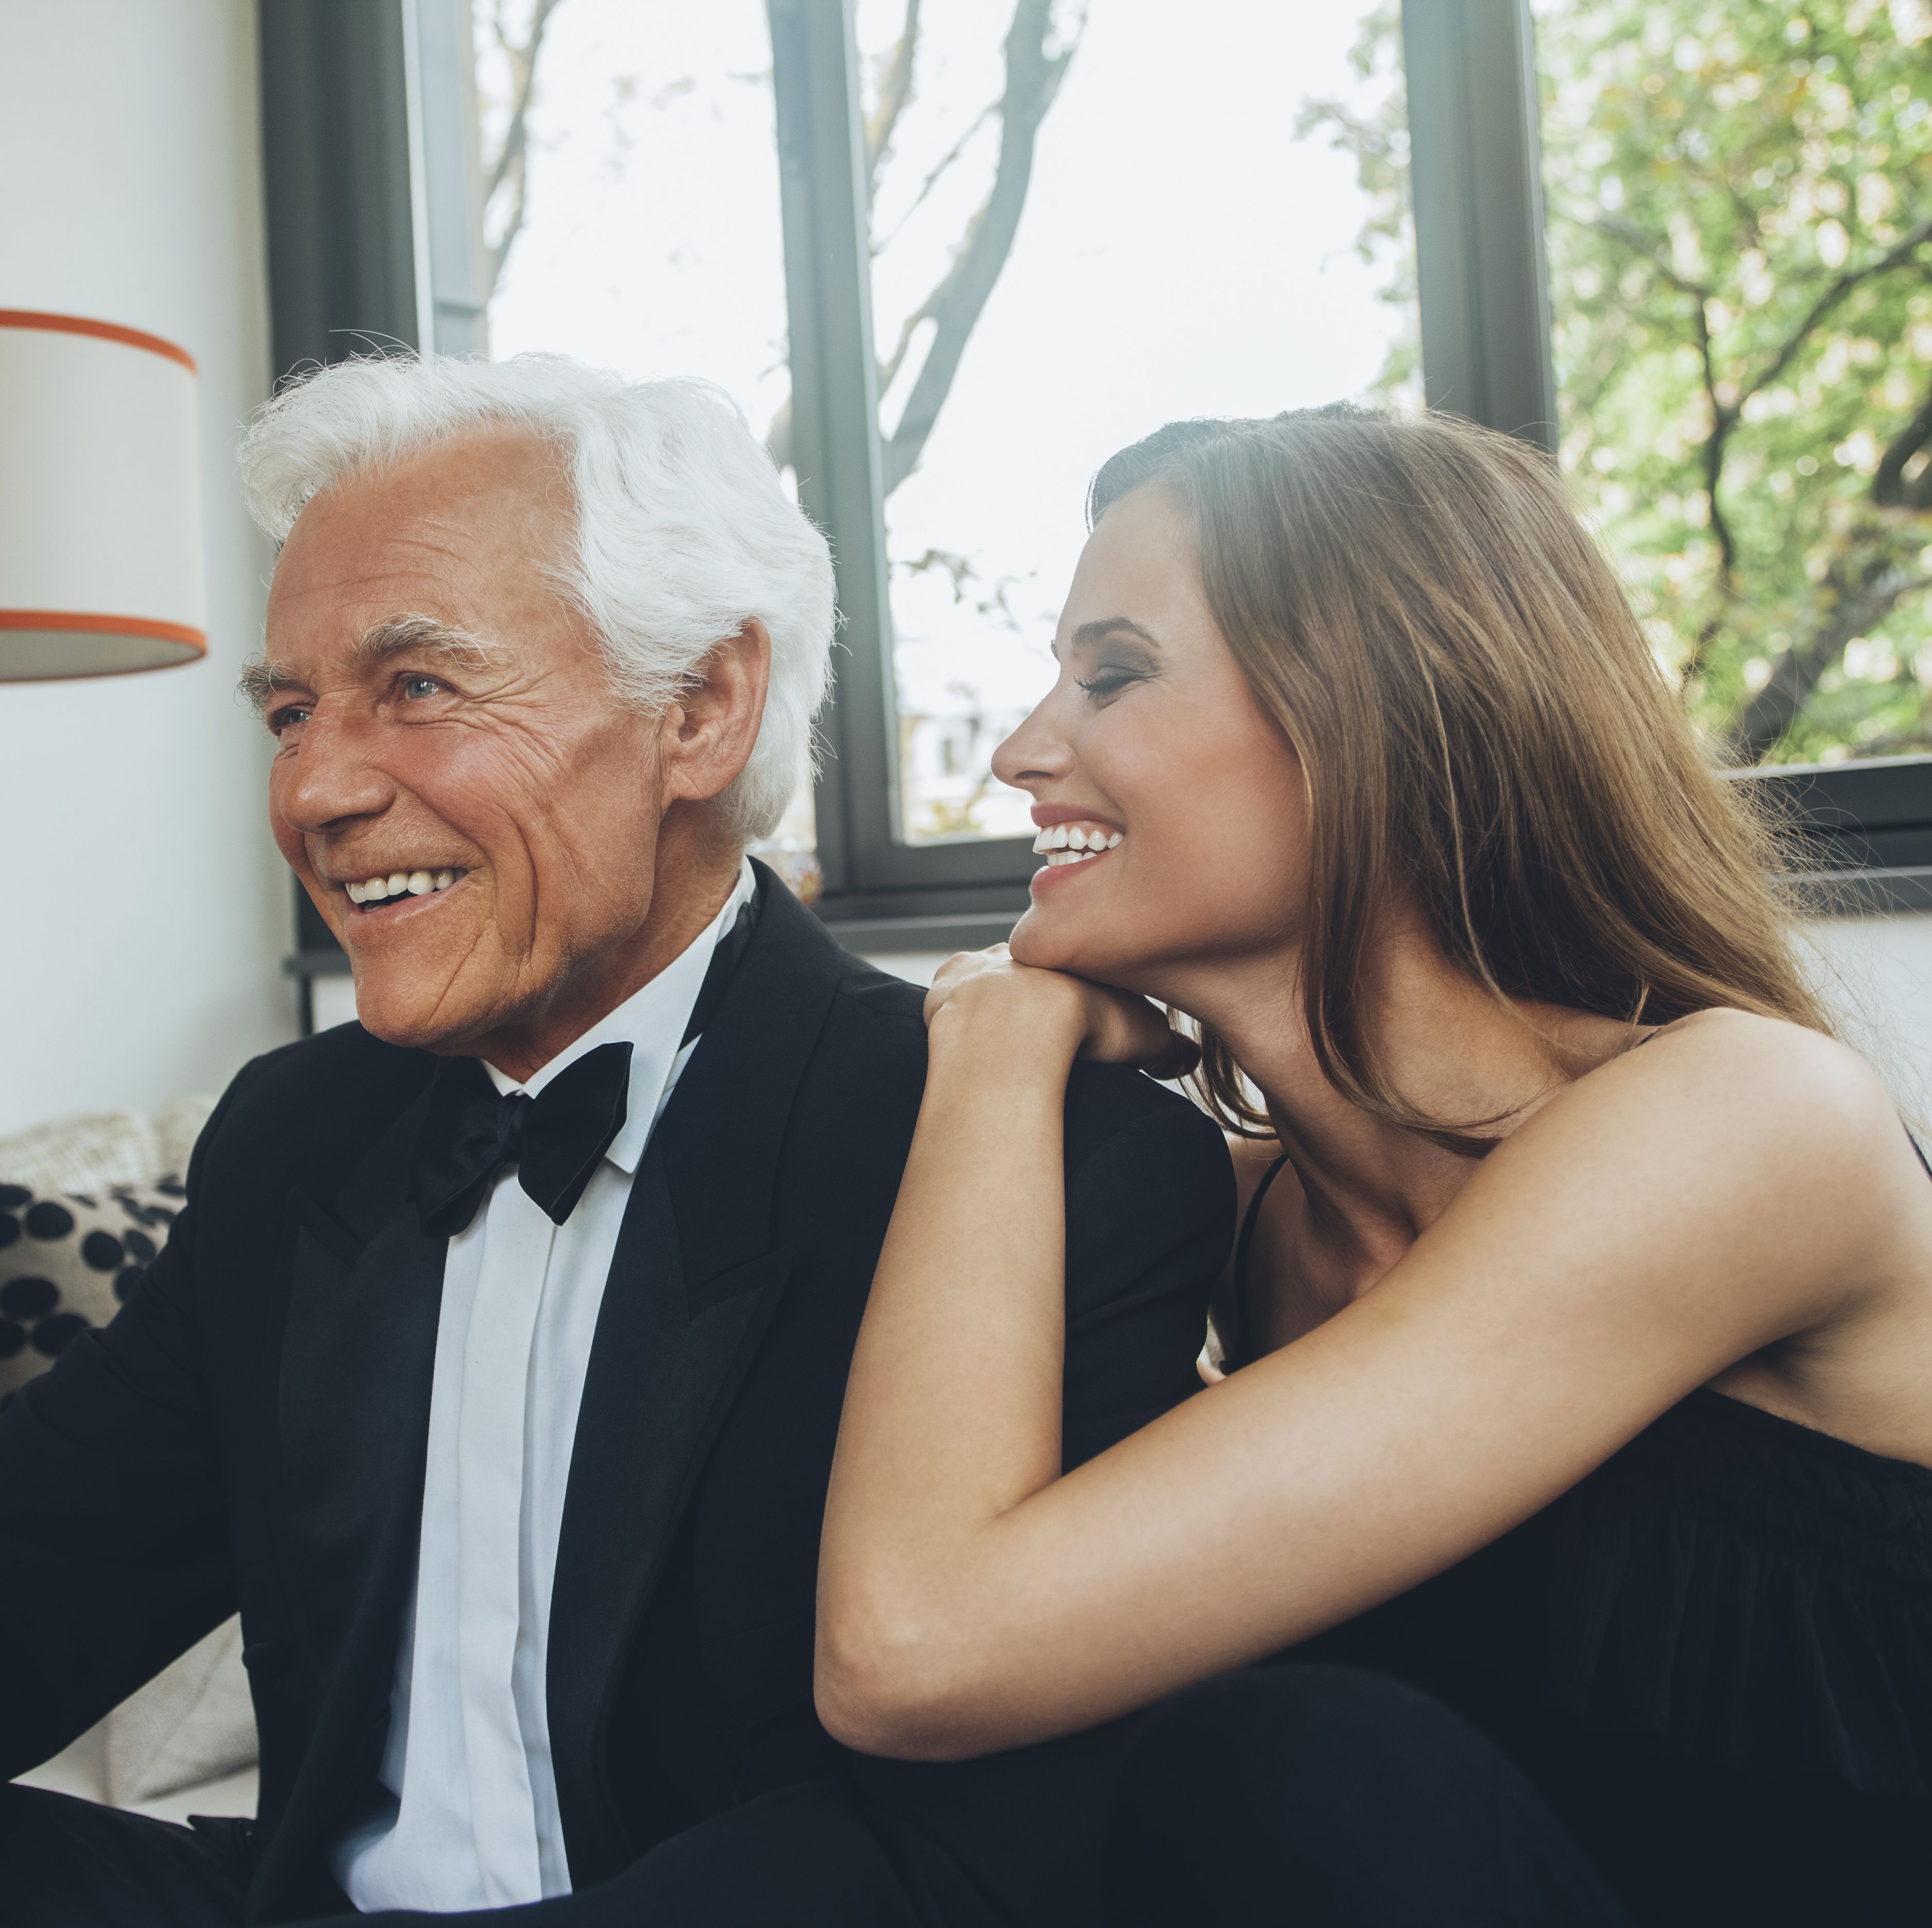 What are the advantages of dating an older man?